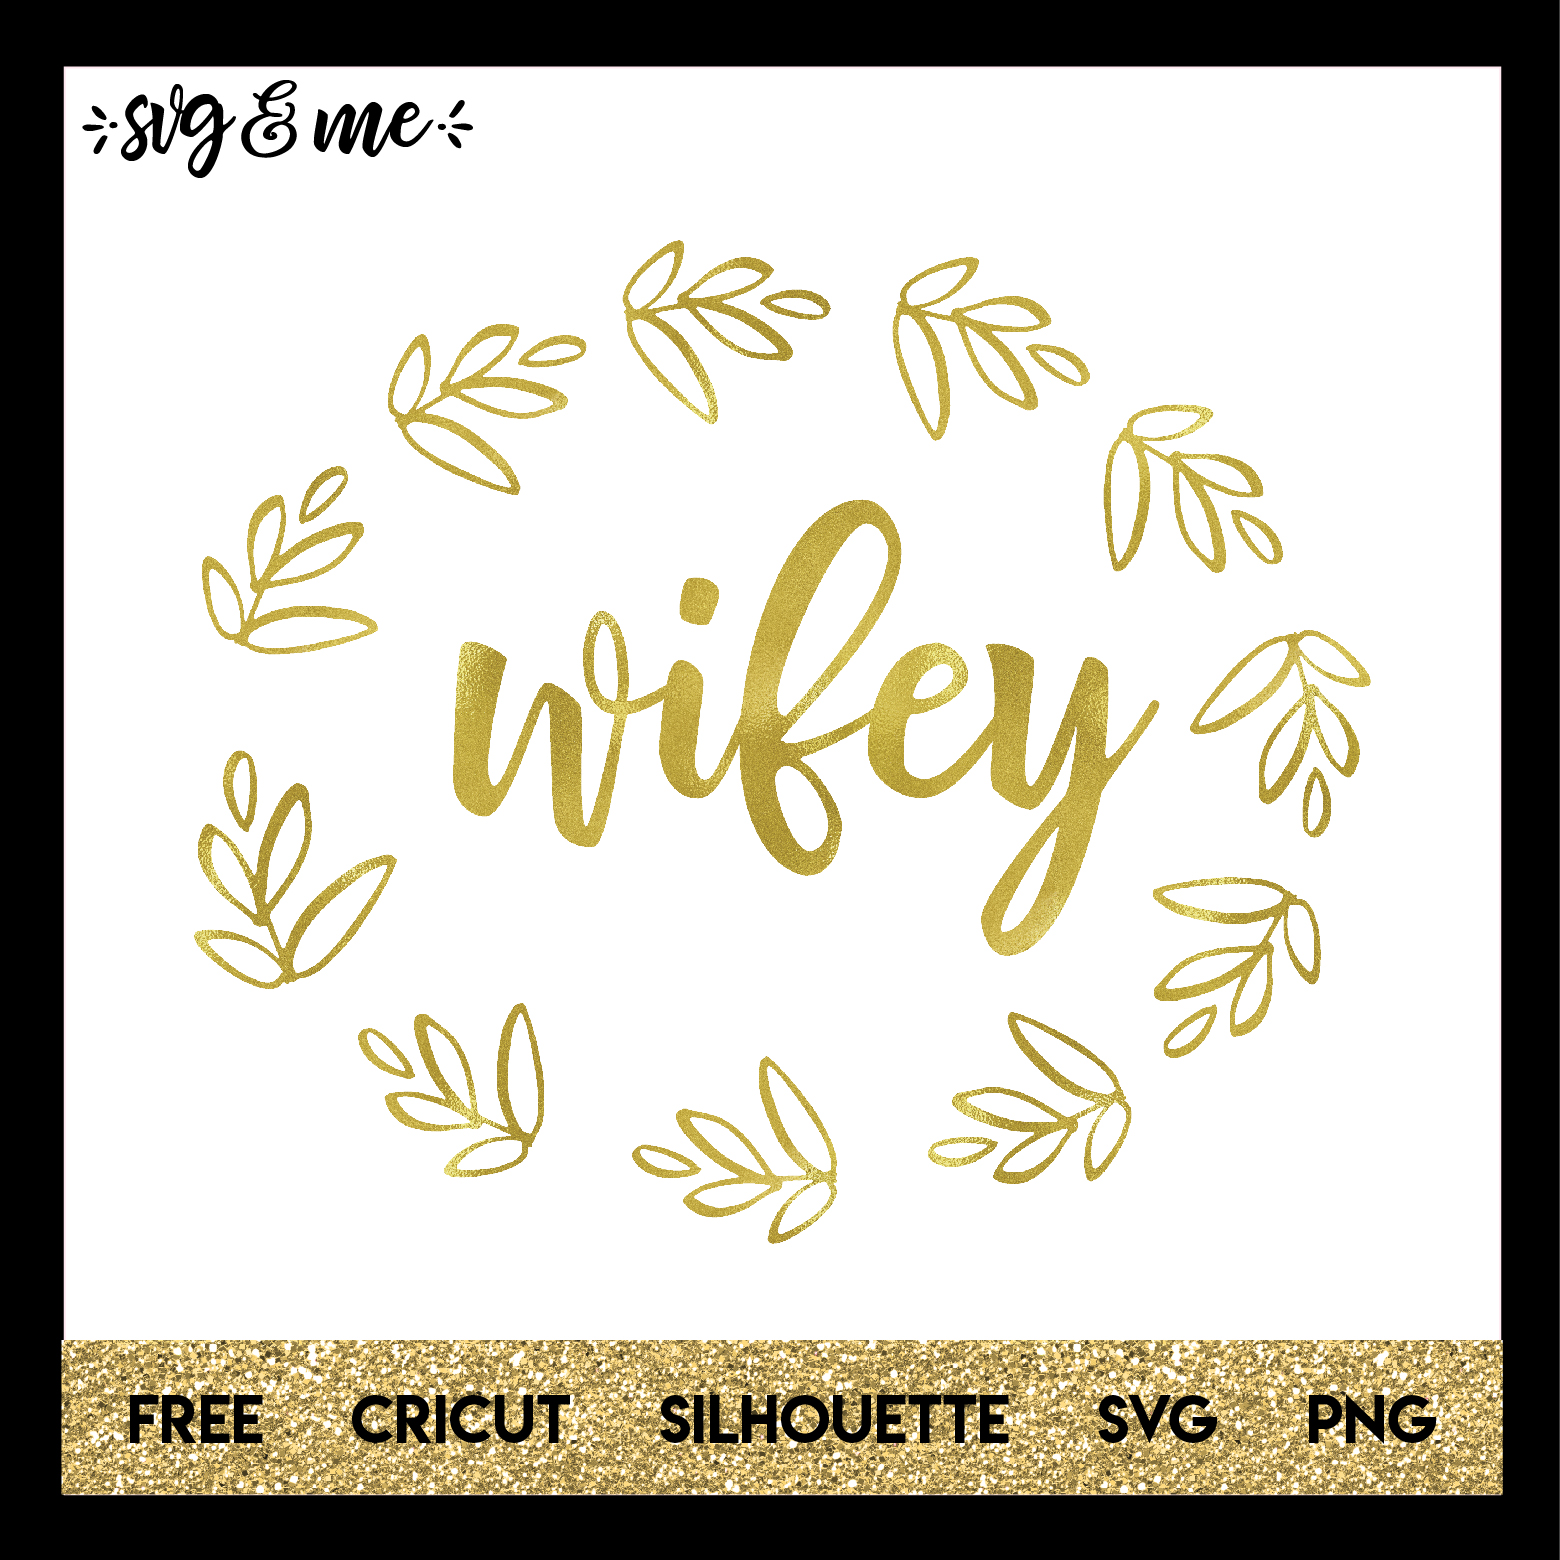 FREE SVG CUT FILE for Cricut, Silhouette and more - Wifey Gold Wreath Wedding SVG